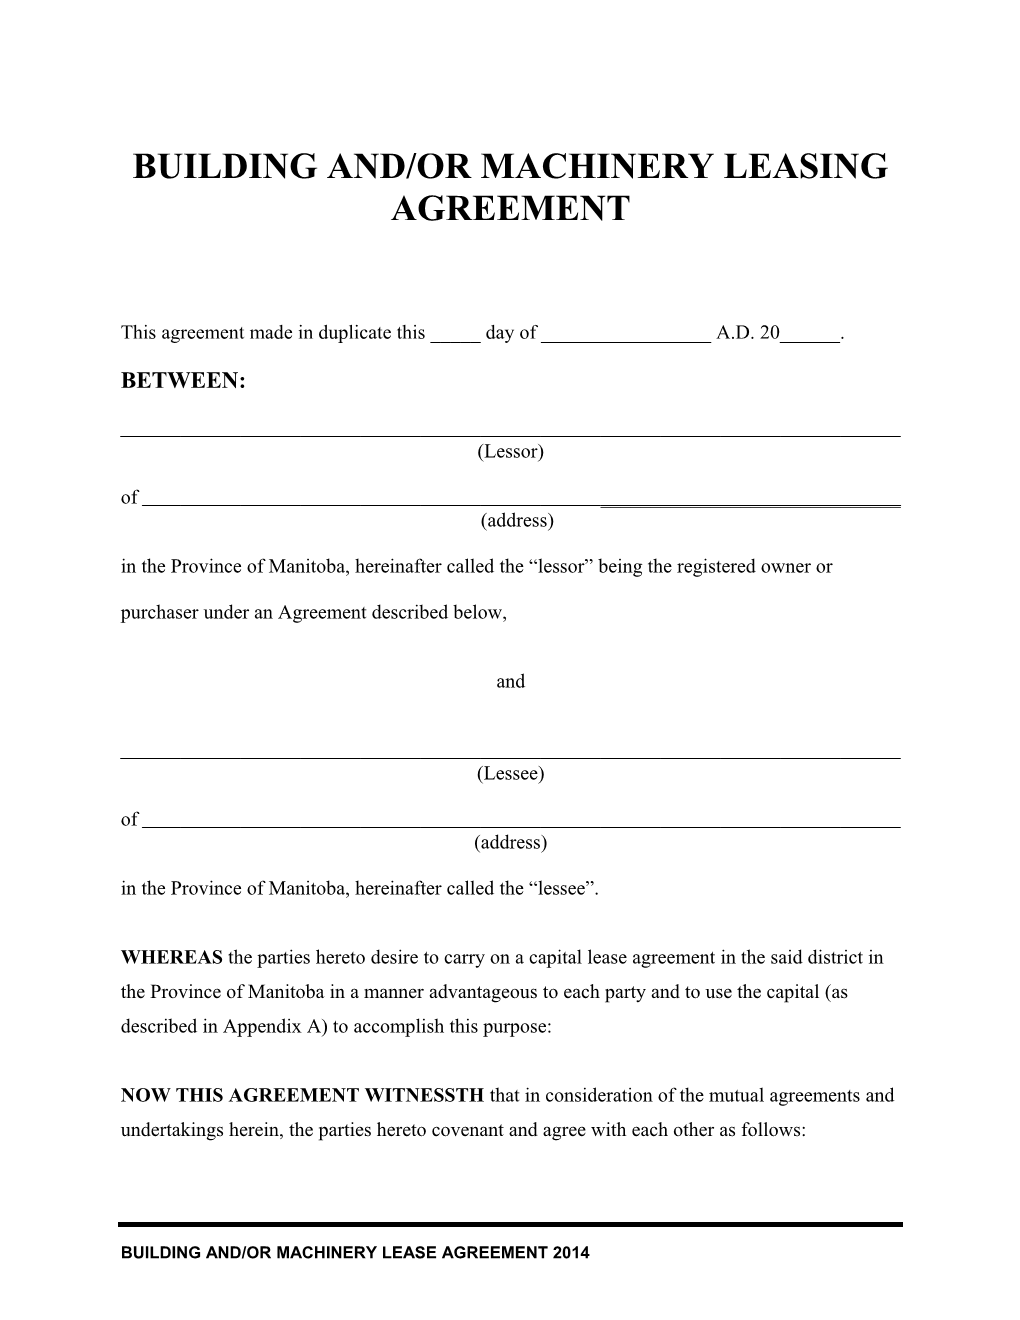 Building And/Or Machinery Leasing Agrrement